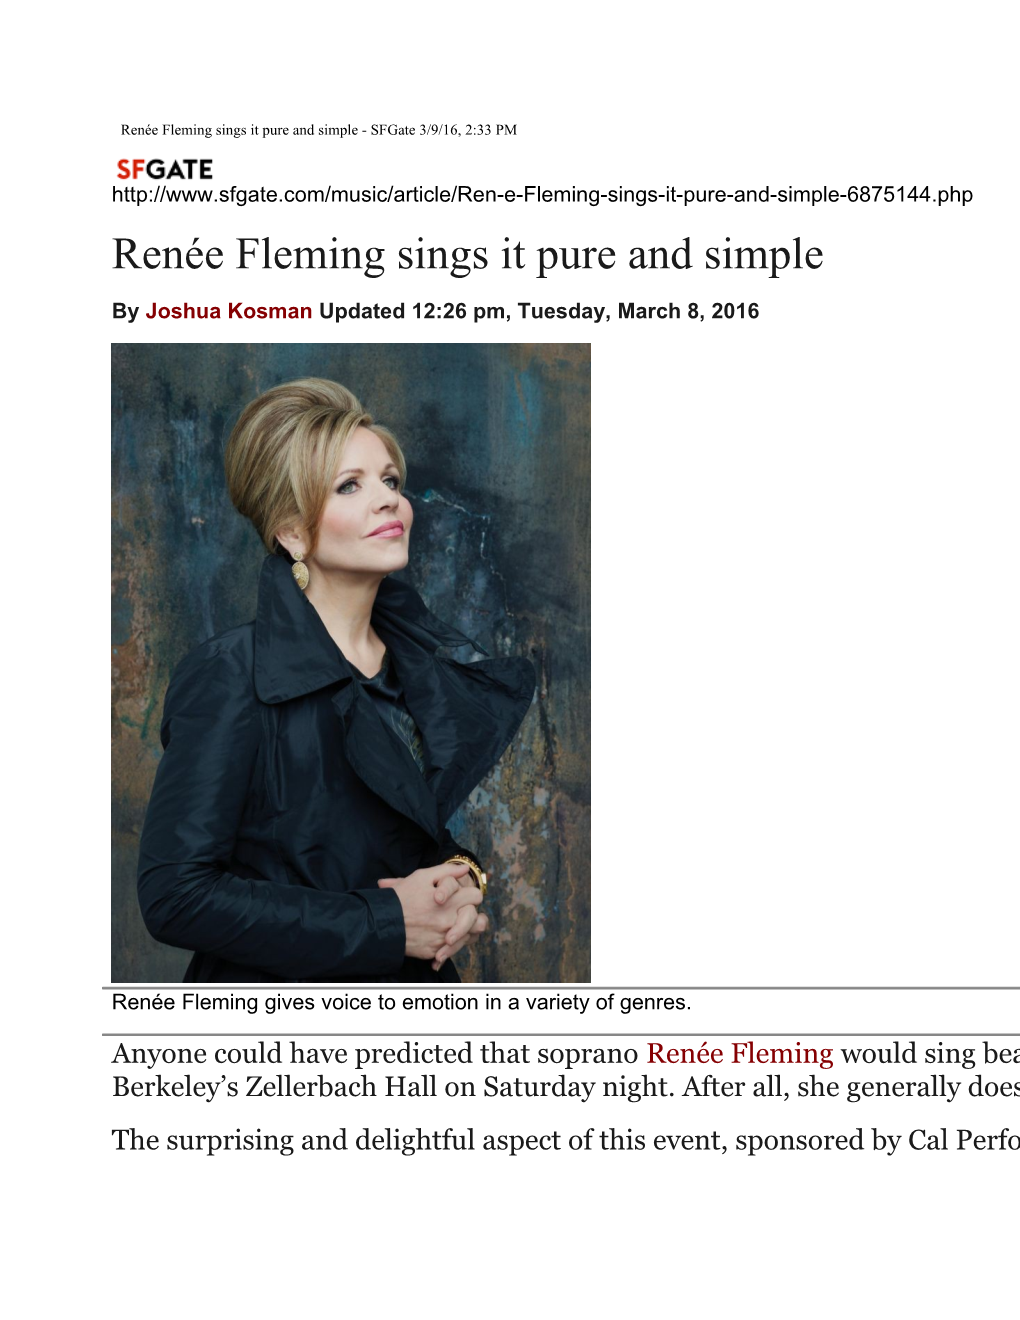 Renée Fleming Sings It Pure and Simple - Sfgate 3/9/16, 2:33 PM